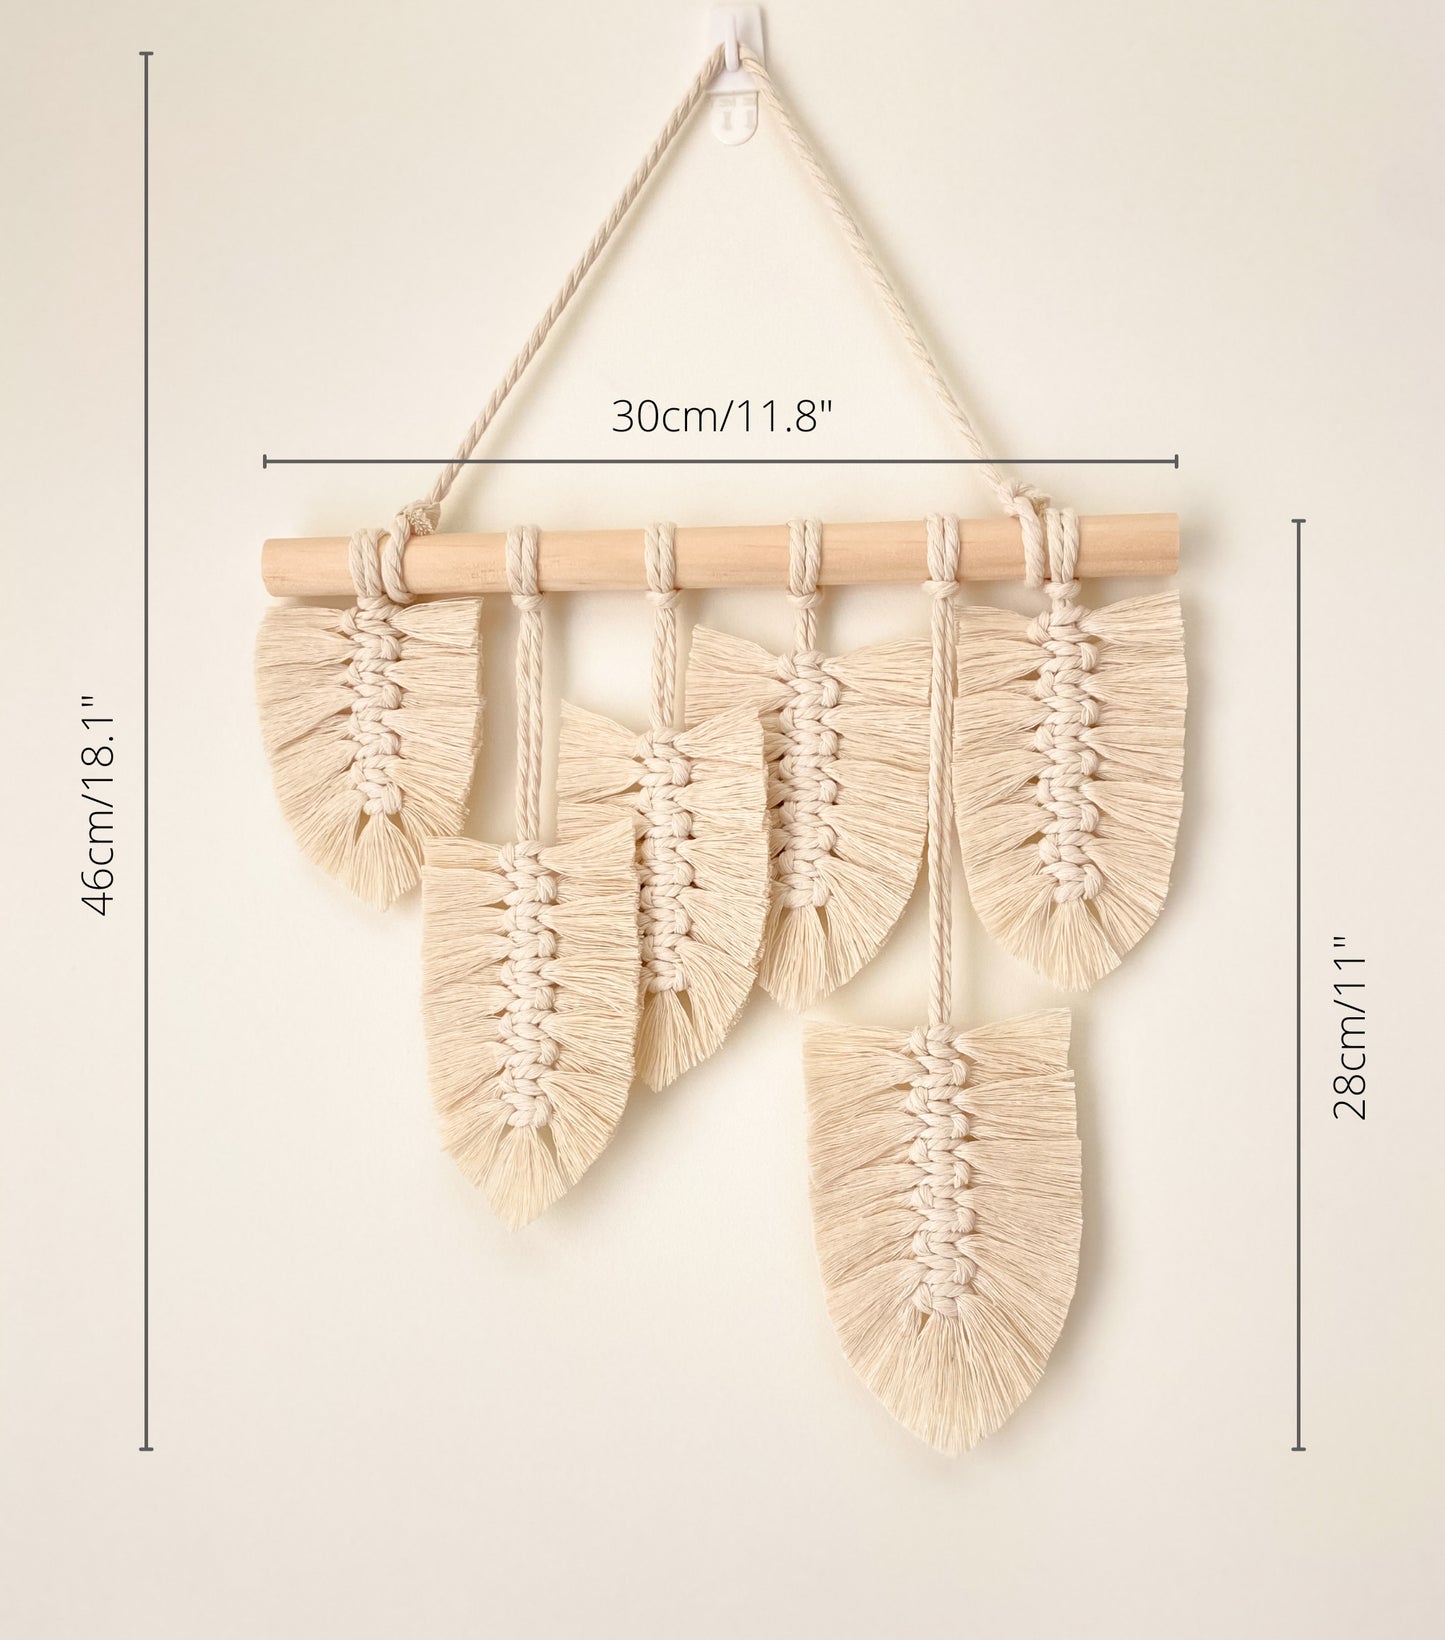 Natural white macrame feather wall hanging hanged on a wall. Dimensions are marked. 